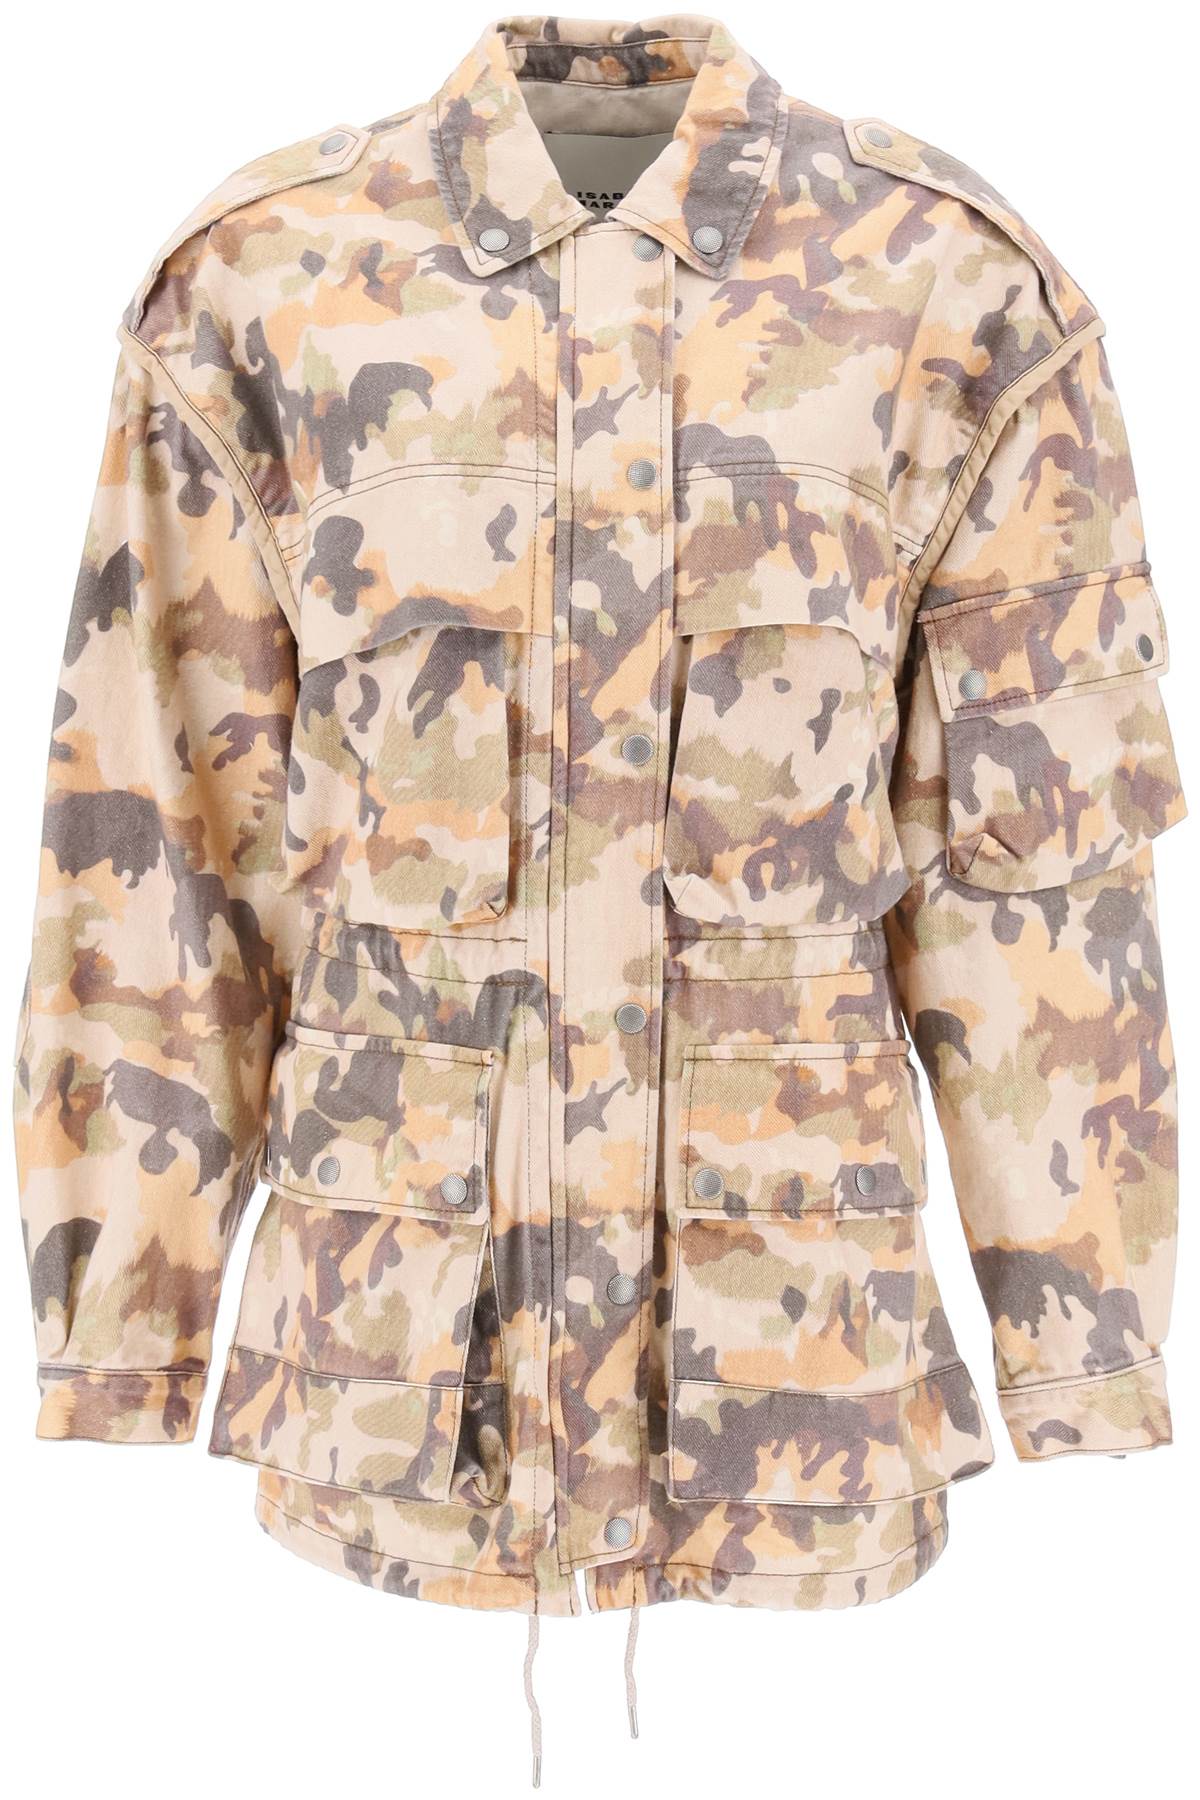 ISABEL MARANT Camouflage Cotton Jacket with Cargo-Inspired Design for Women - SS23 Collection